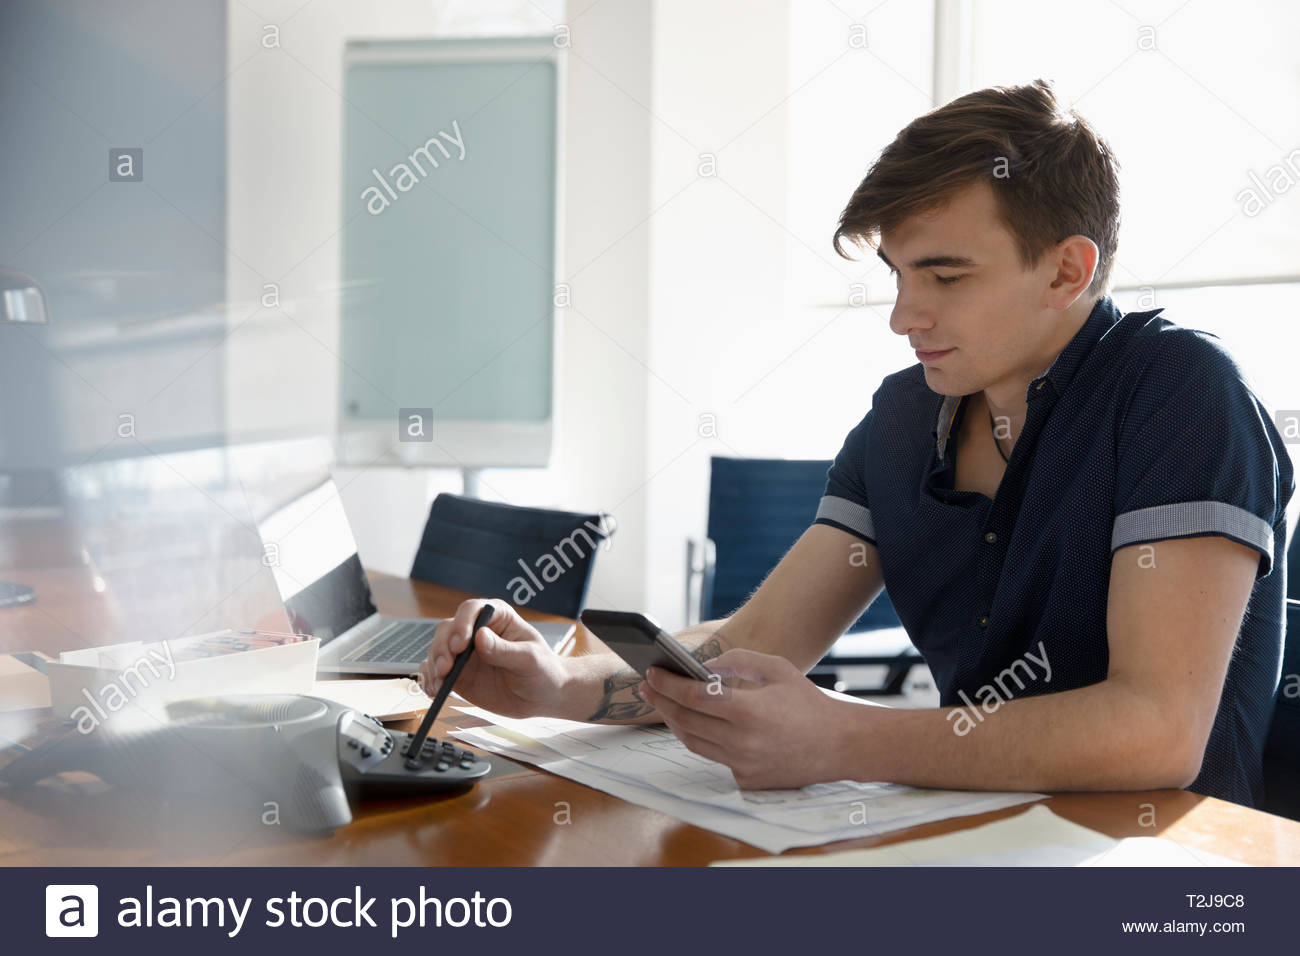 Businessman preparing for conference call in conference room Stock Photo